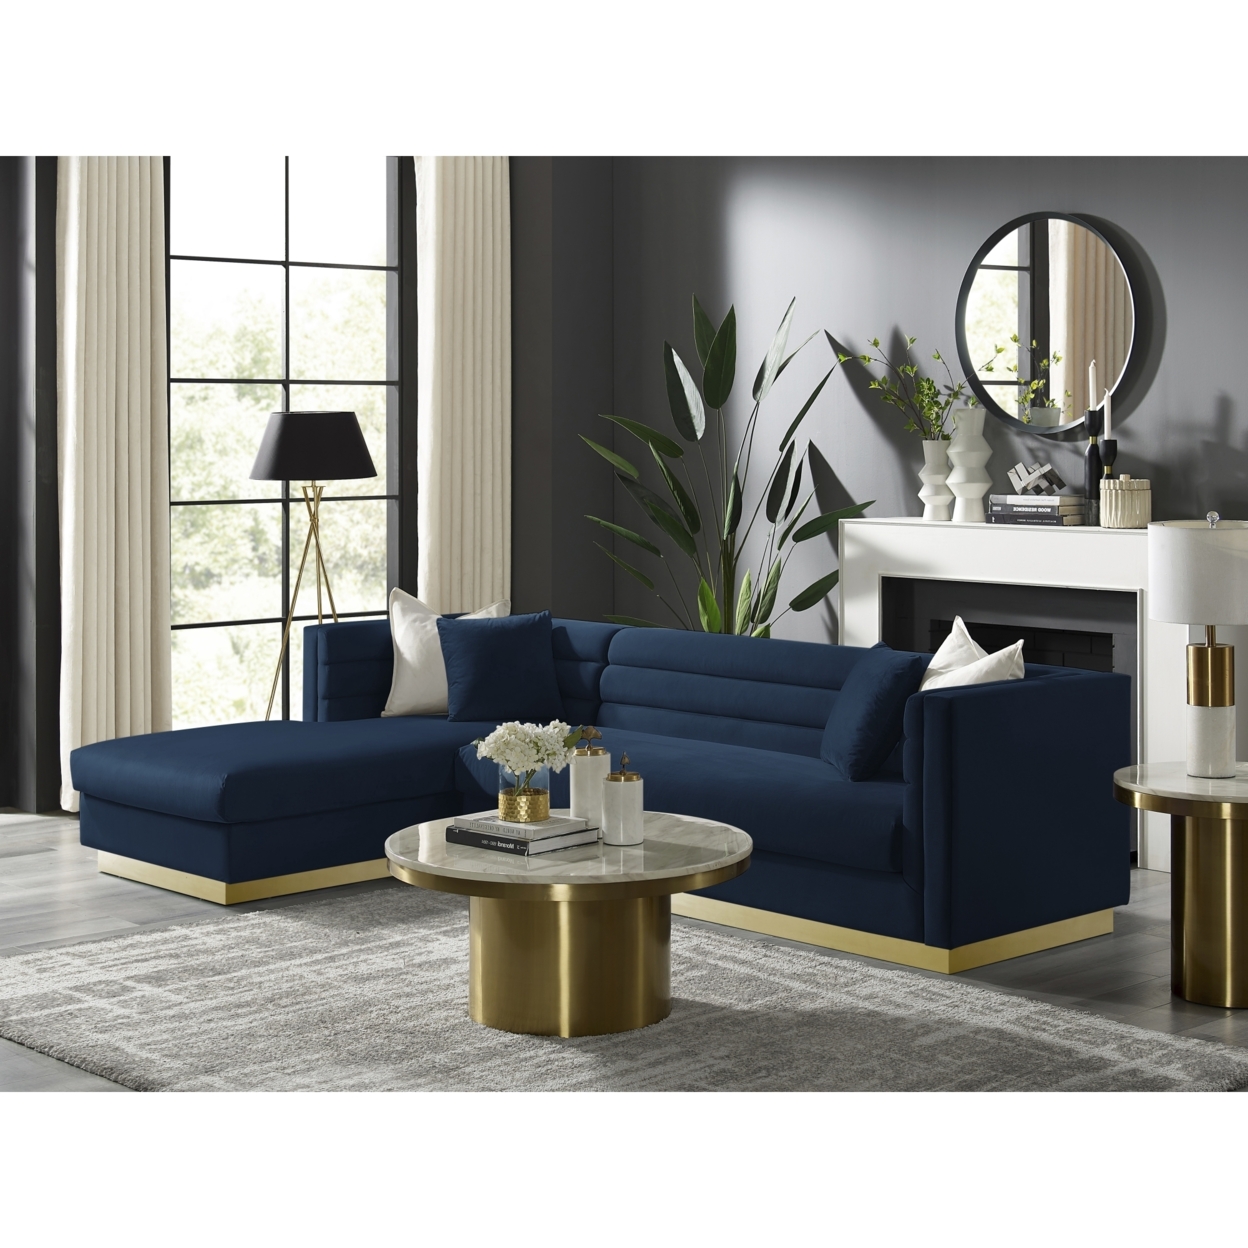 Aja Sofa-Upholstered-Sectional-Metal Base, Square Arms-Horizontal Channel Tufting - Dark Grey